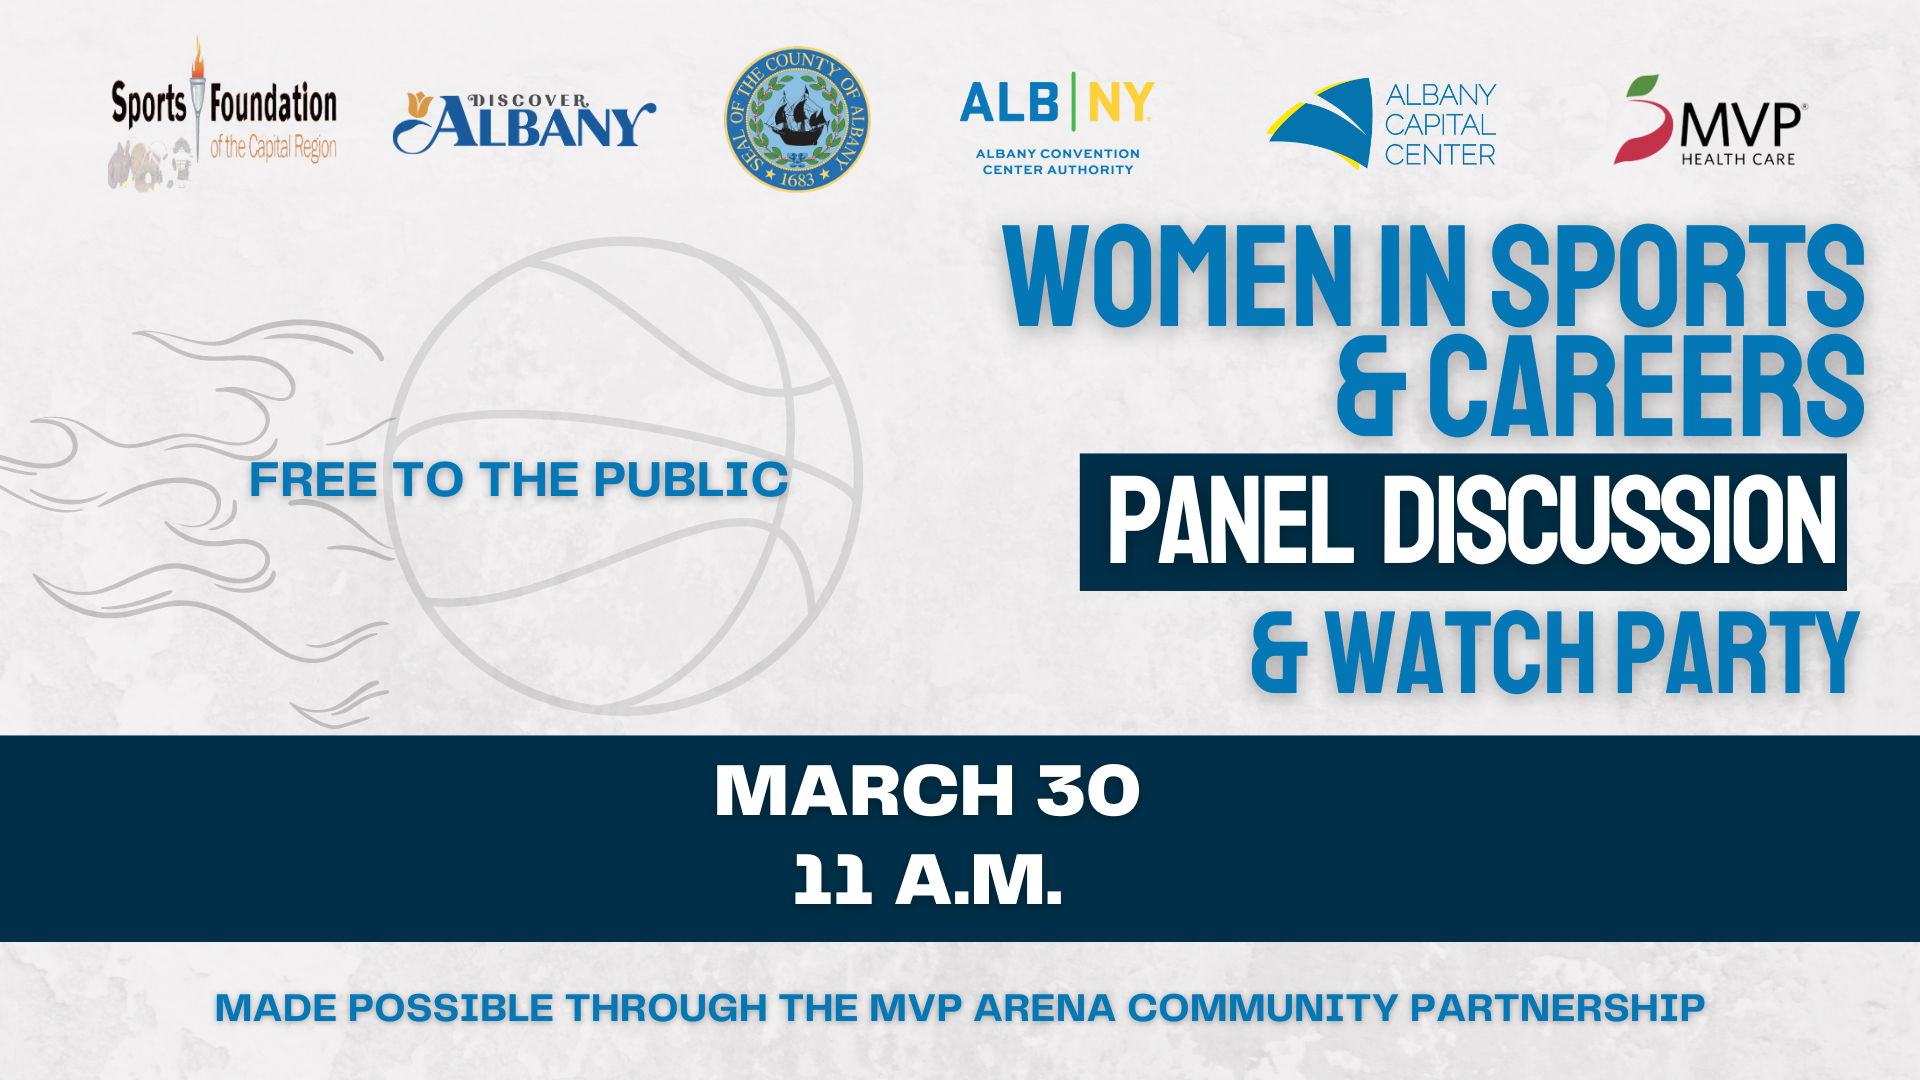 Women in Sports & Careers Panel Discussion & Watch Party